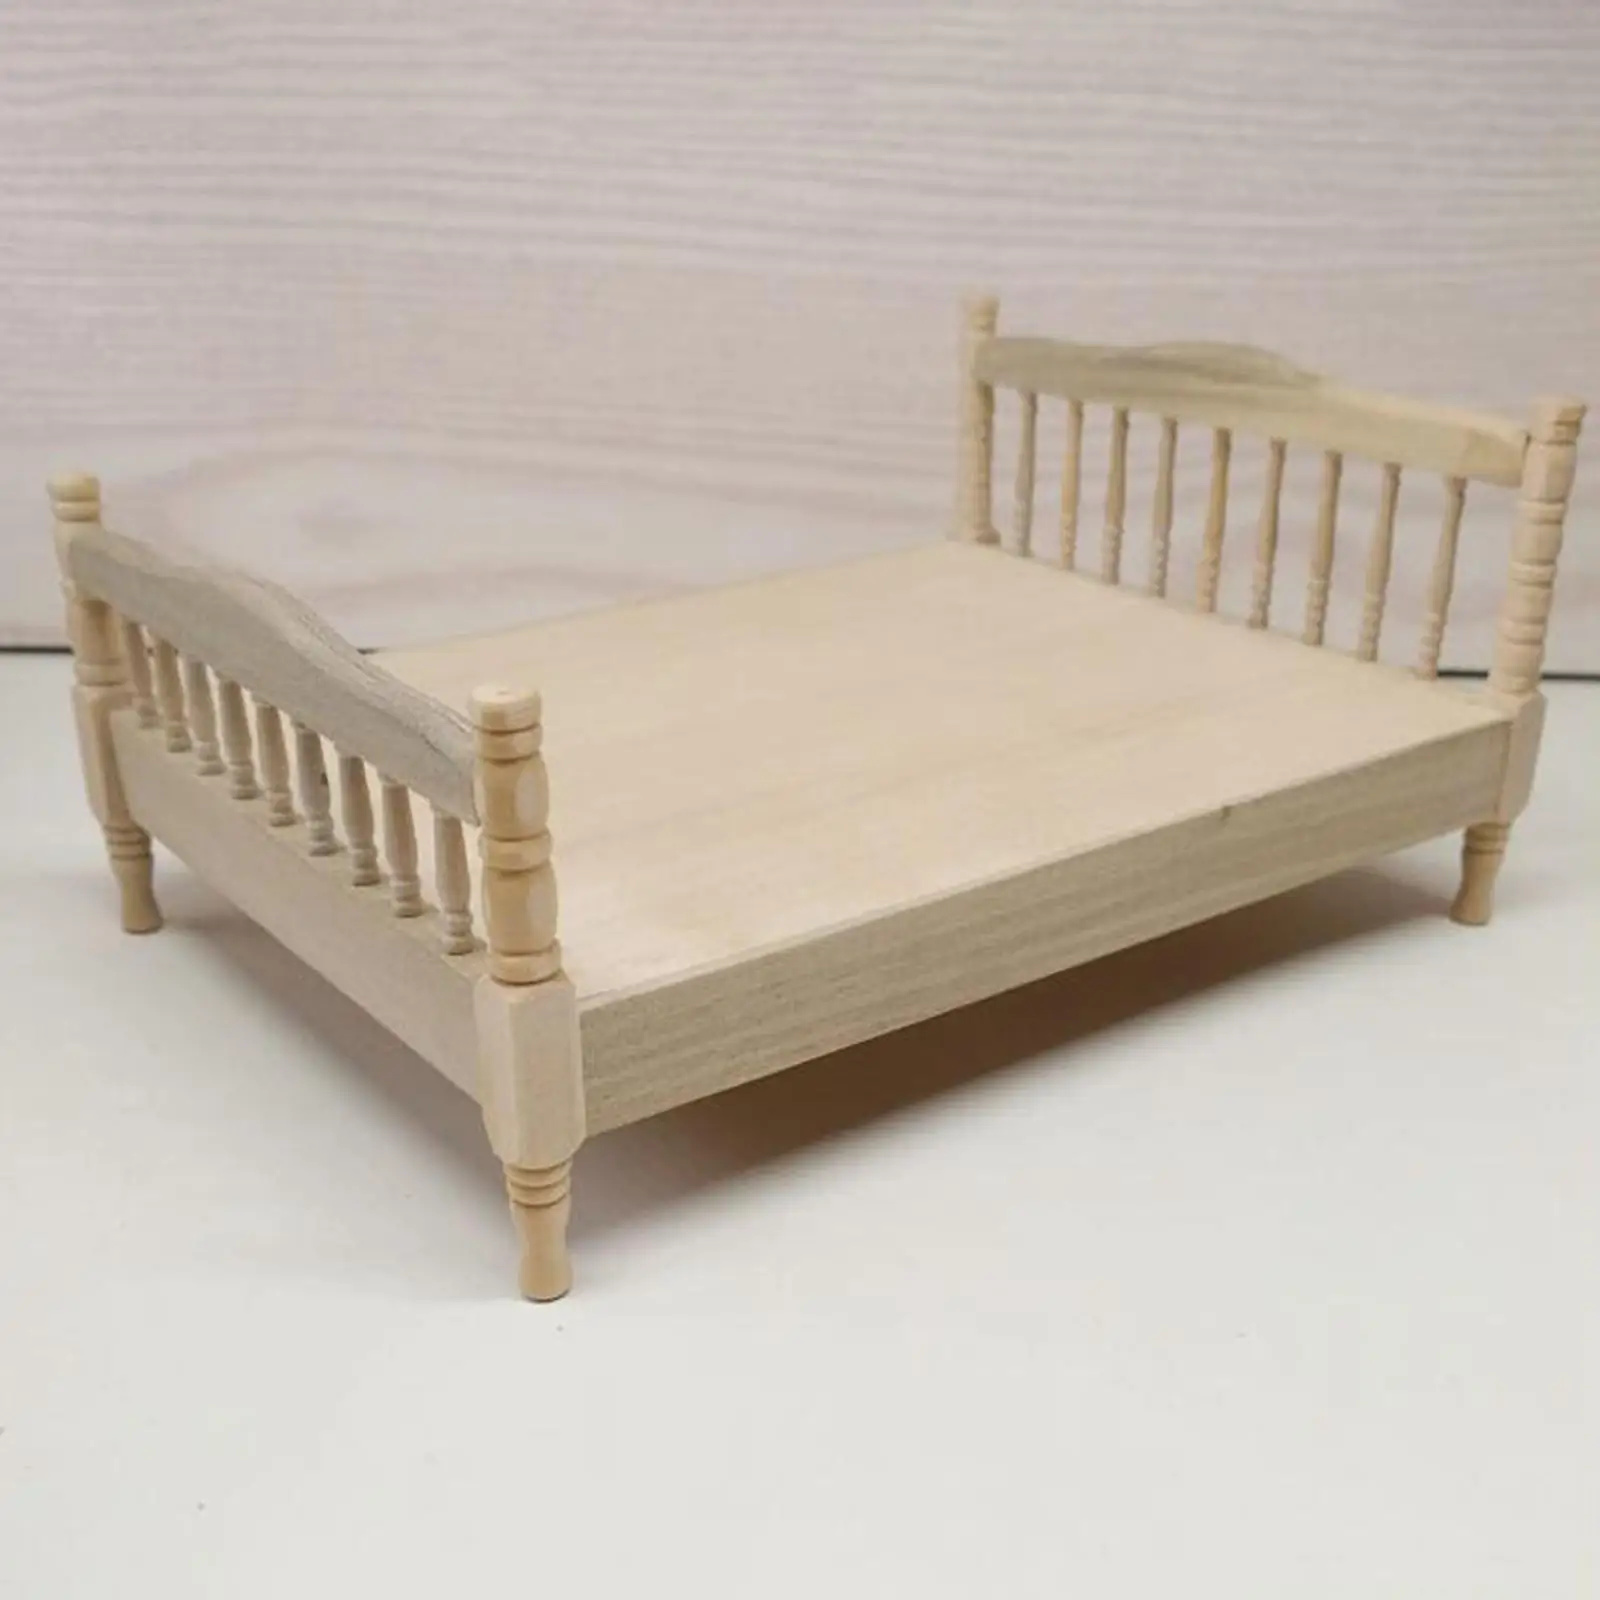 

1:12 Dollhouse Double Bed Model Realistic Simulated Wooden Mini Bed for Building Decoration DIY Scenery Model Train DIY Projects